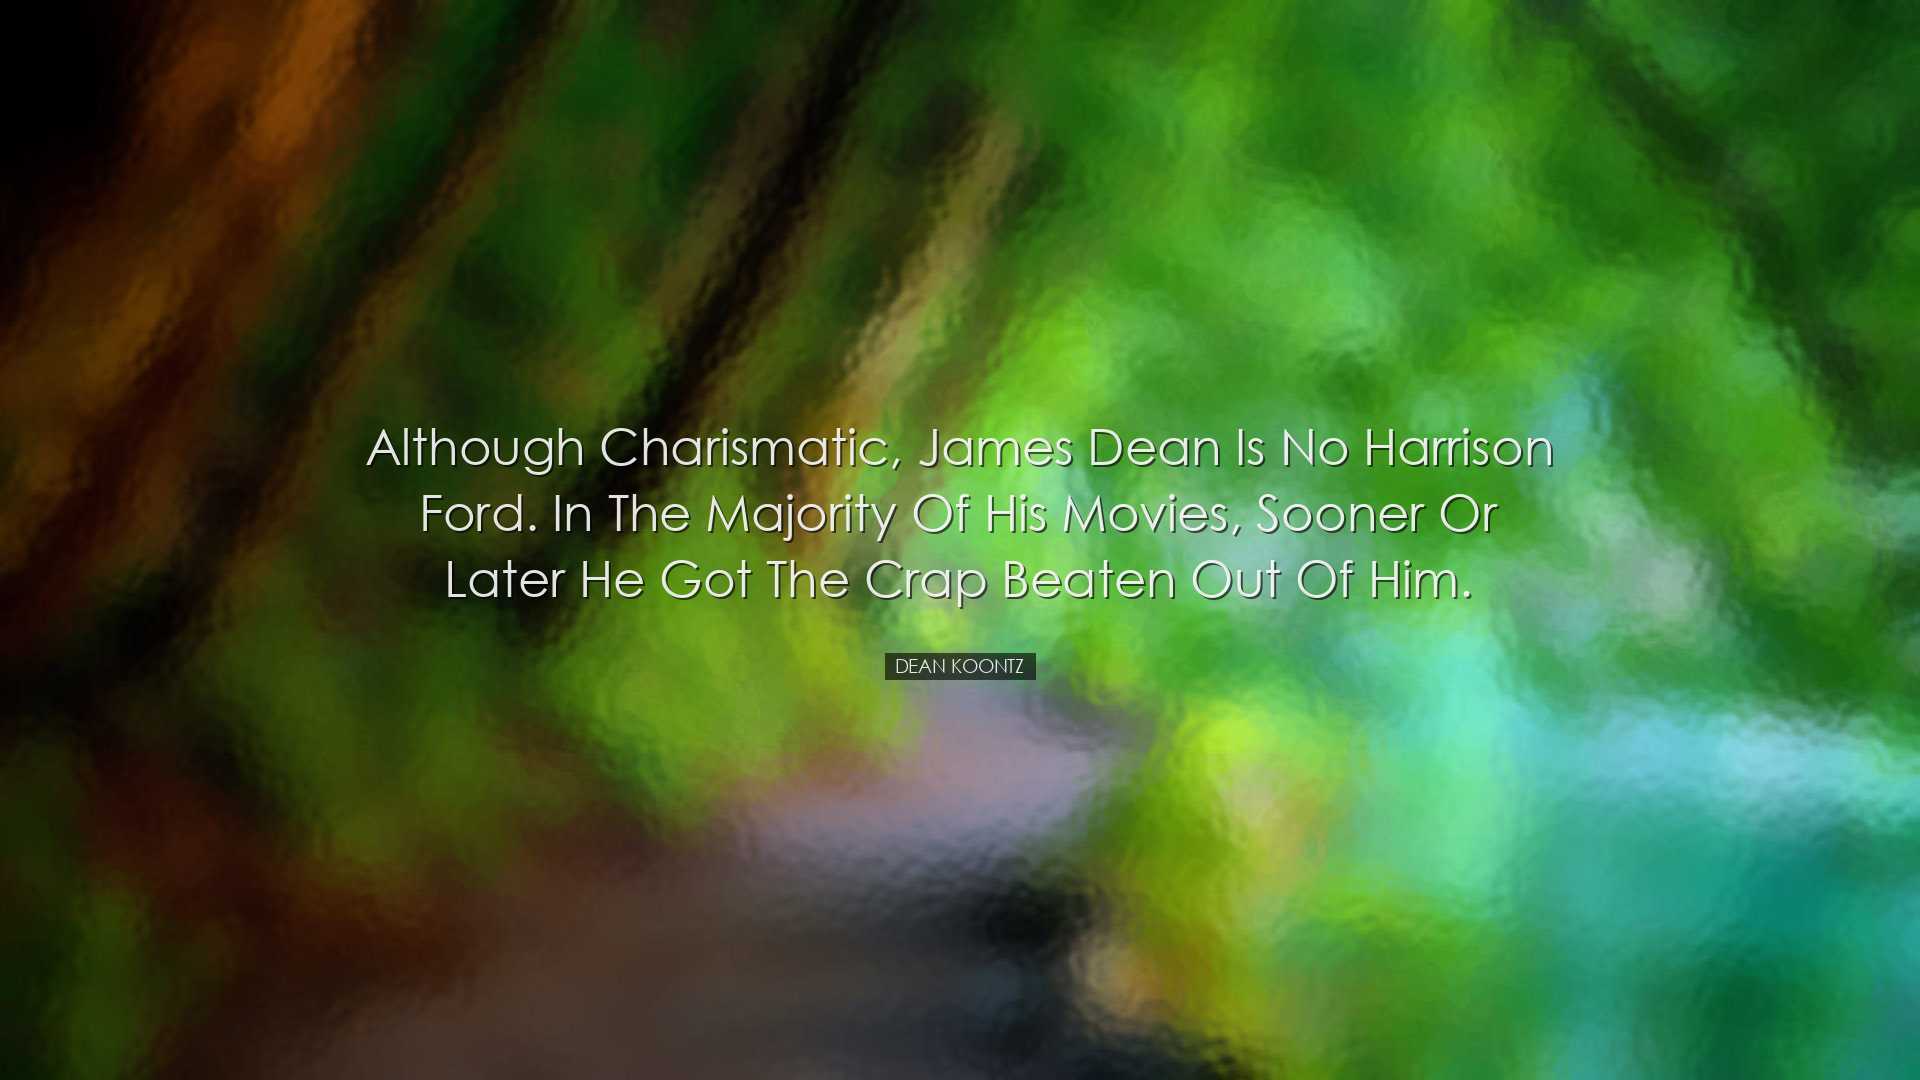 Although charismatic, James Dean is no Harrison Ford. In the major